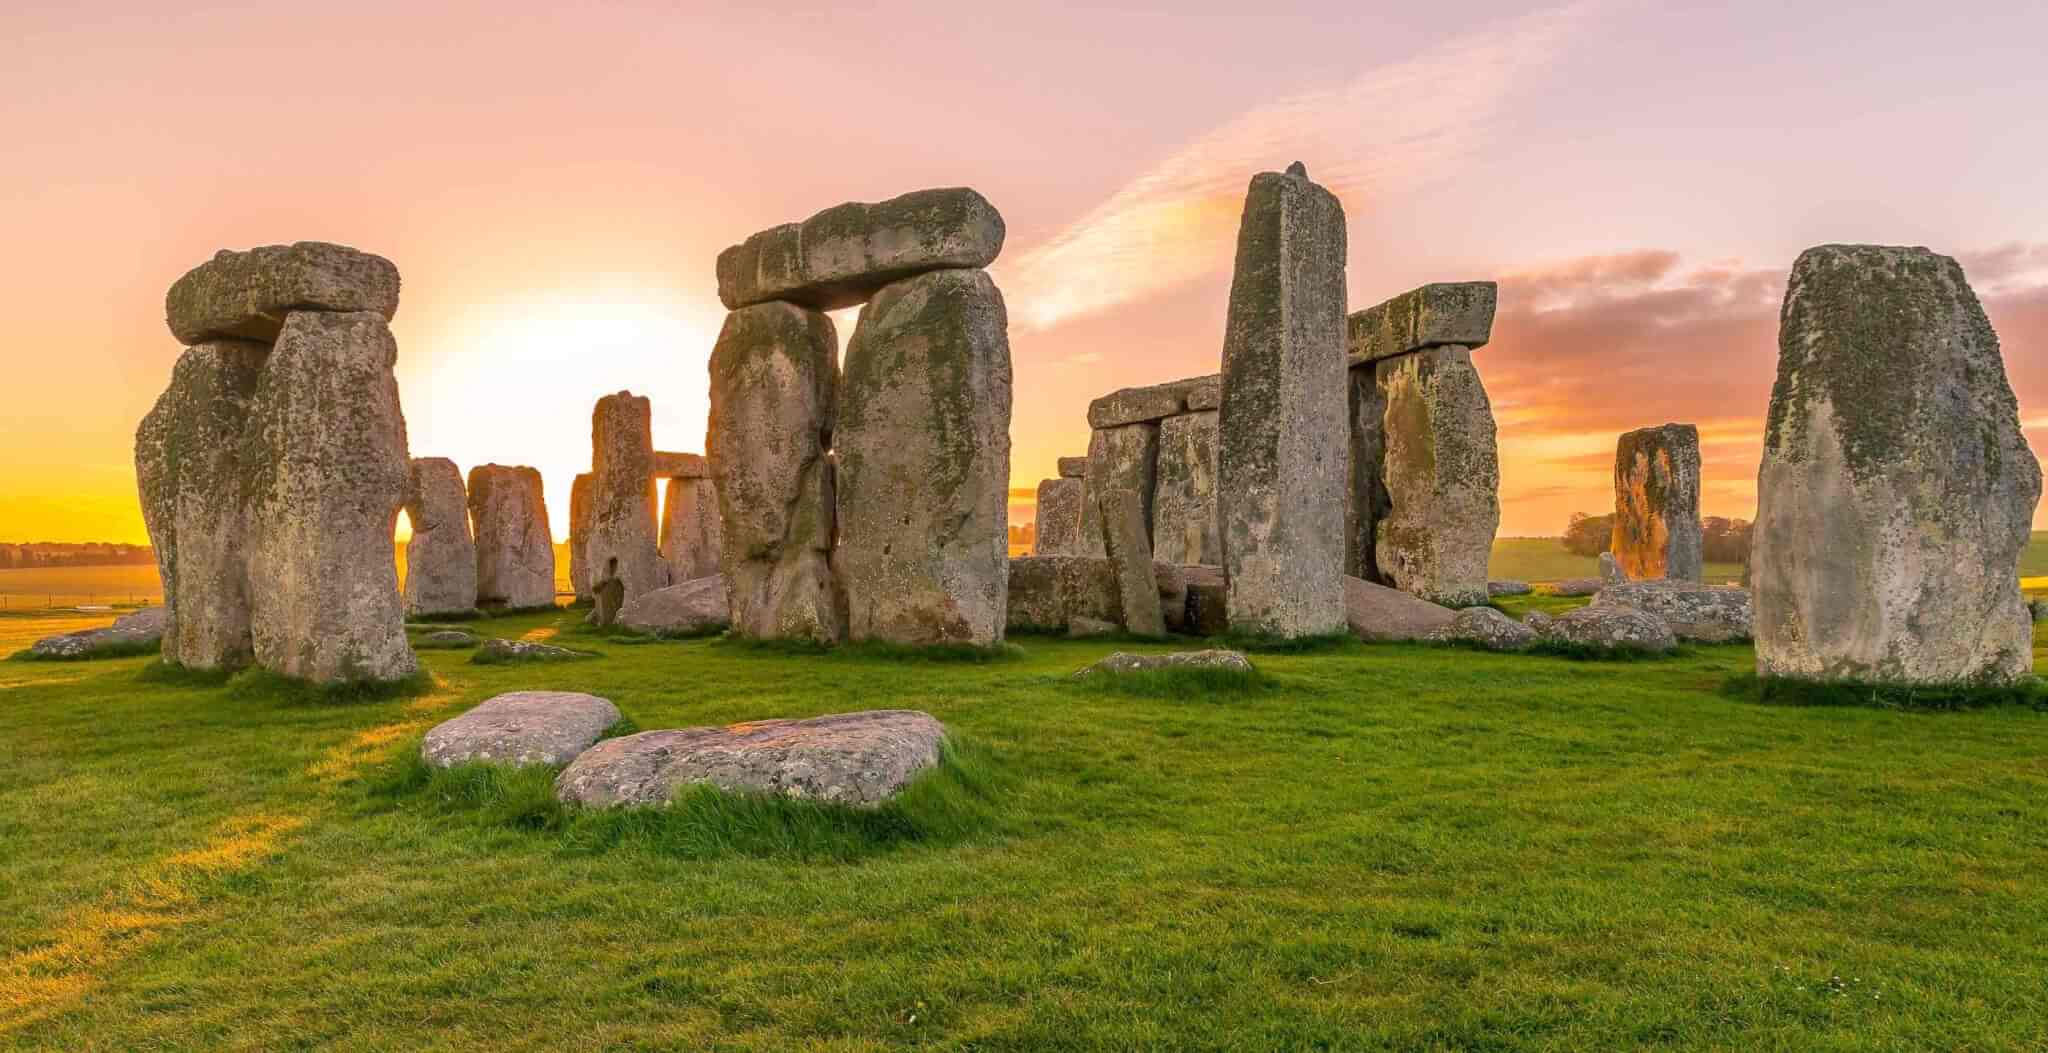 good historical places to visit uk